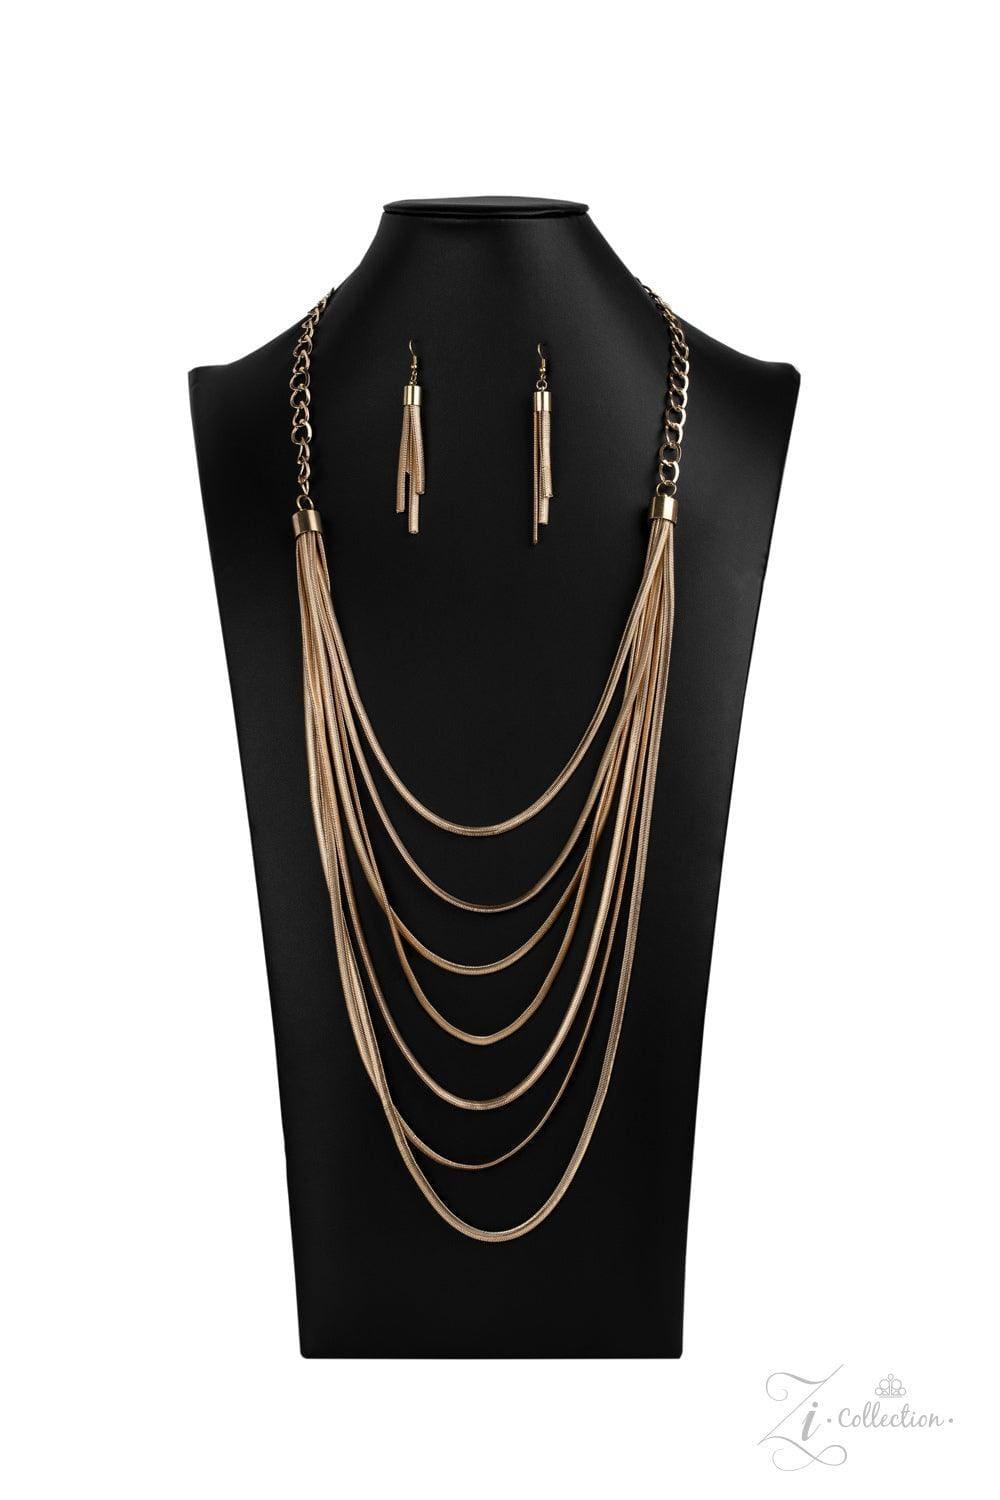 Paparazzi Accessories - Commanding - 2020 Zi Collection Necklace - Bling by JessieK